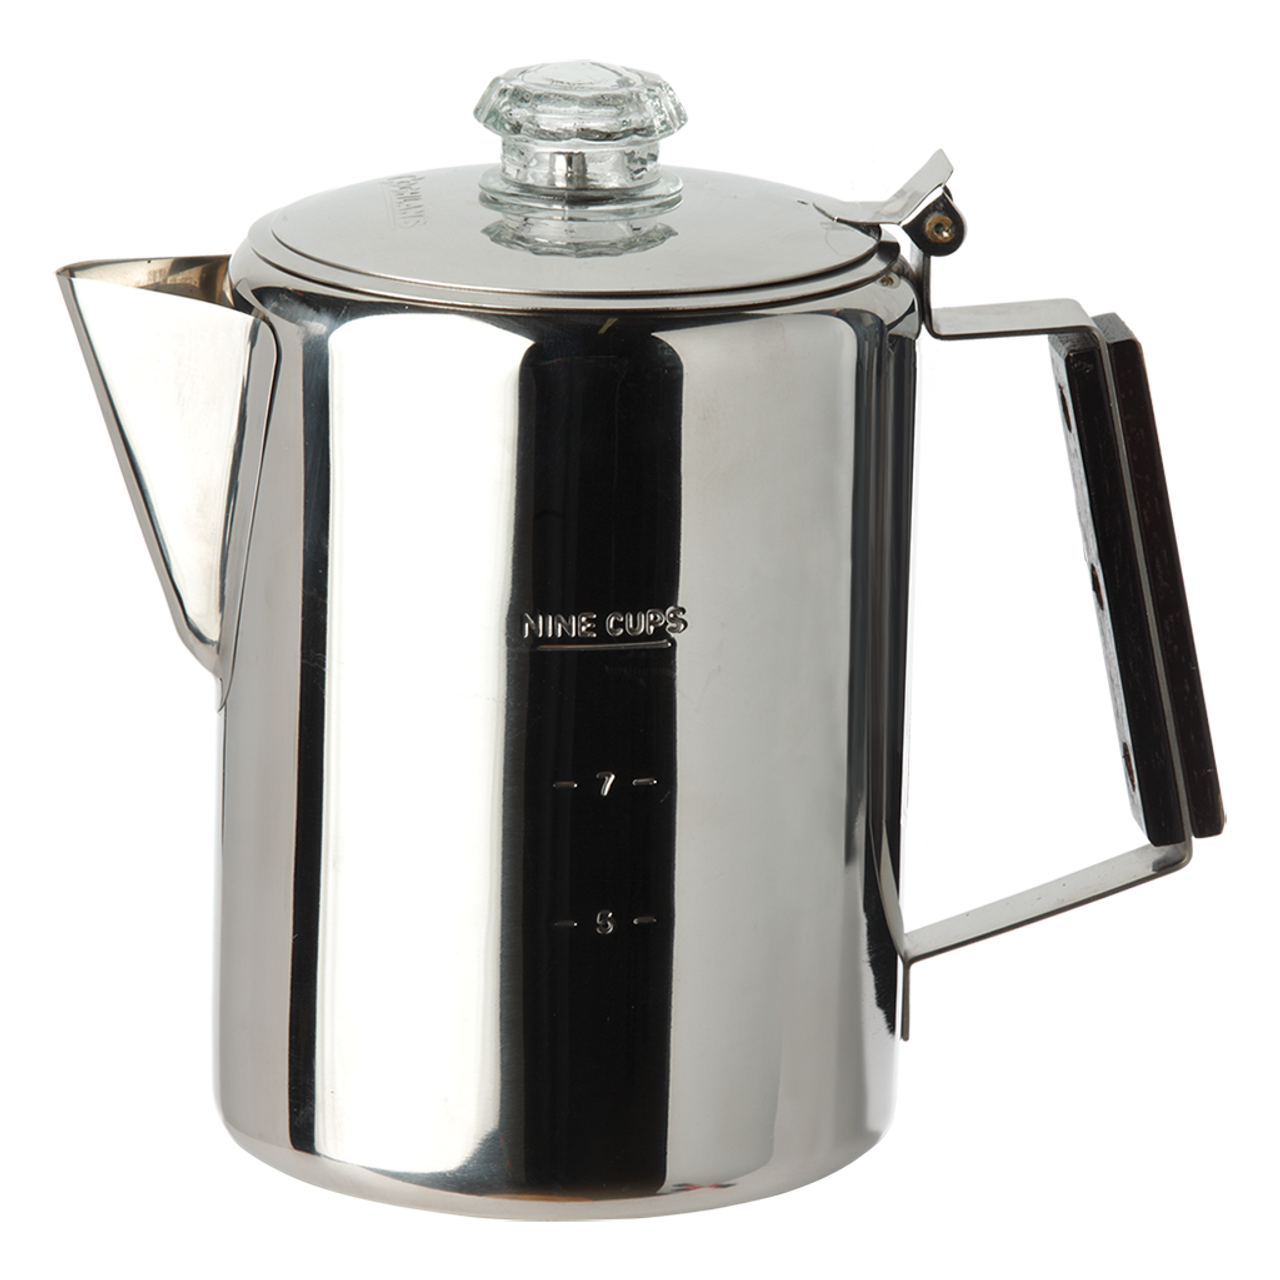 Coghlan's Stainless Steel Coffee Pot, 9 Cups